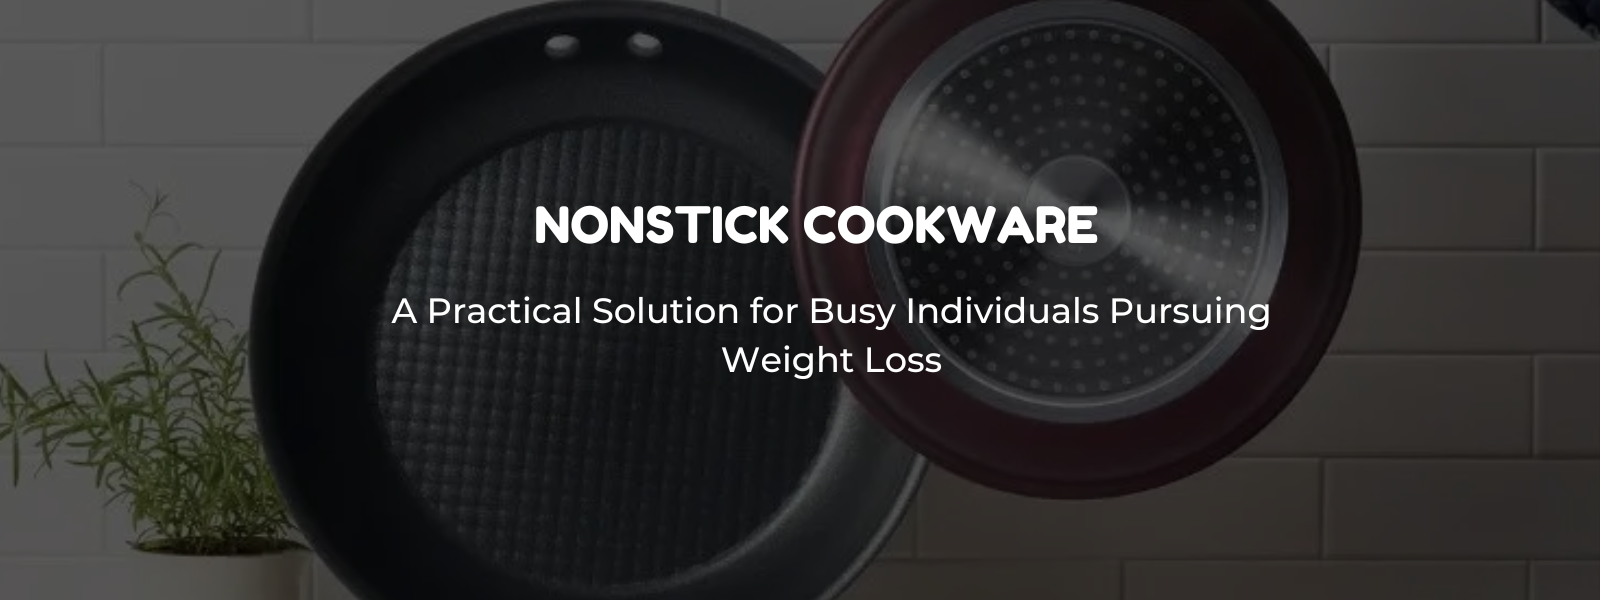 Nonstick Cookware: A Practical Solution for Busy Individuals Pursuing Weight Loss